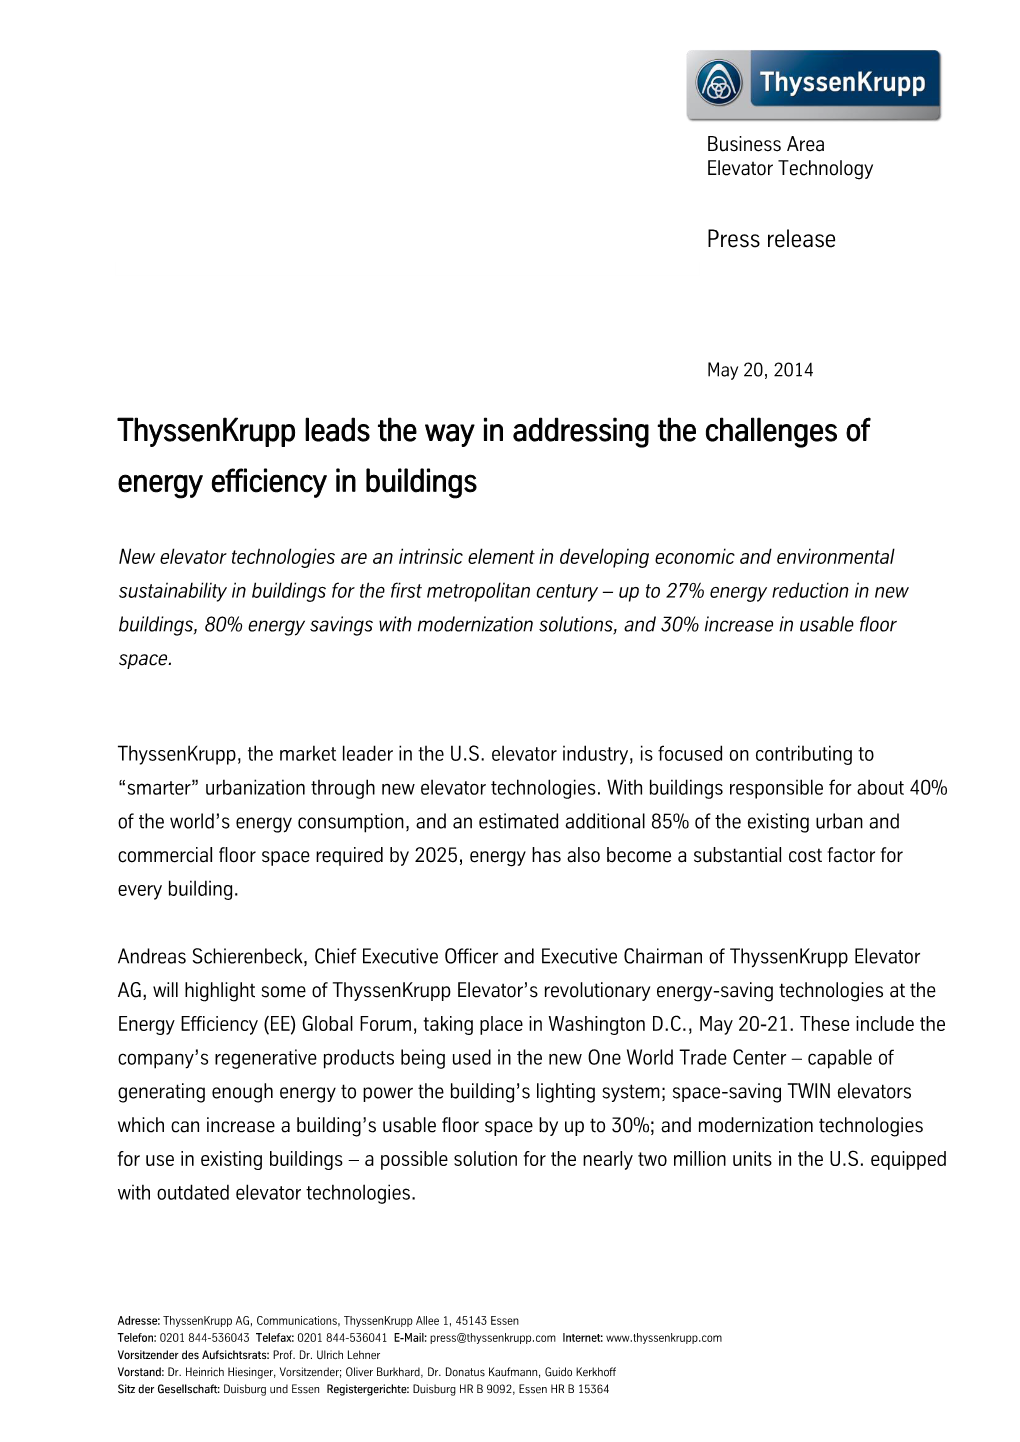 Thyssenkrupp Leads the Way in Addressing the Challenges of Energy Efficiency in Buildings